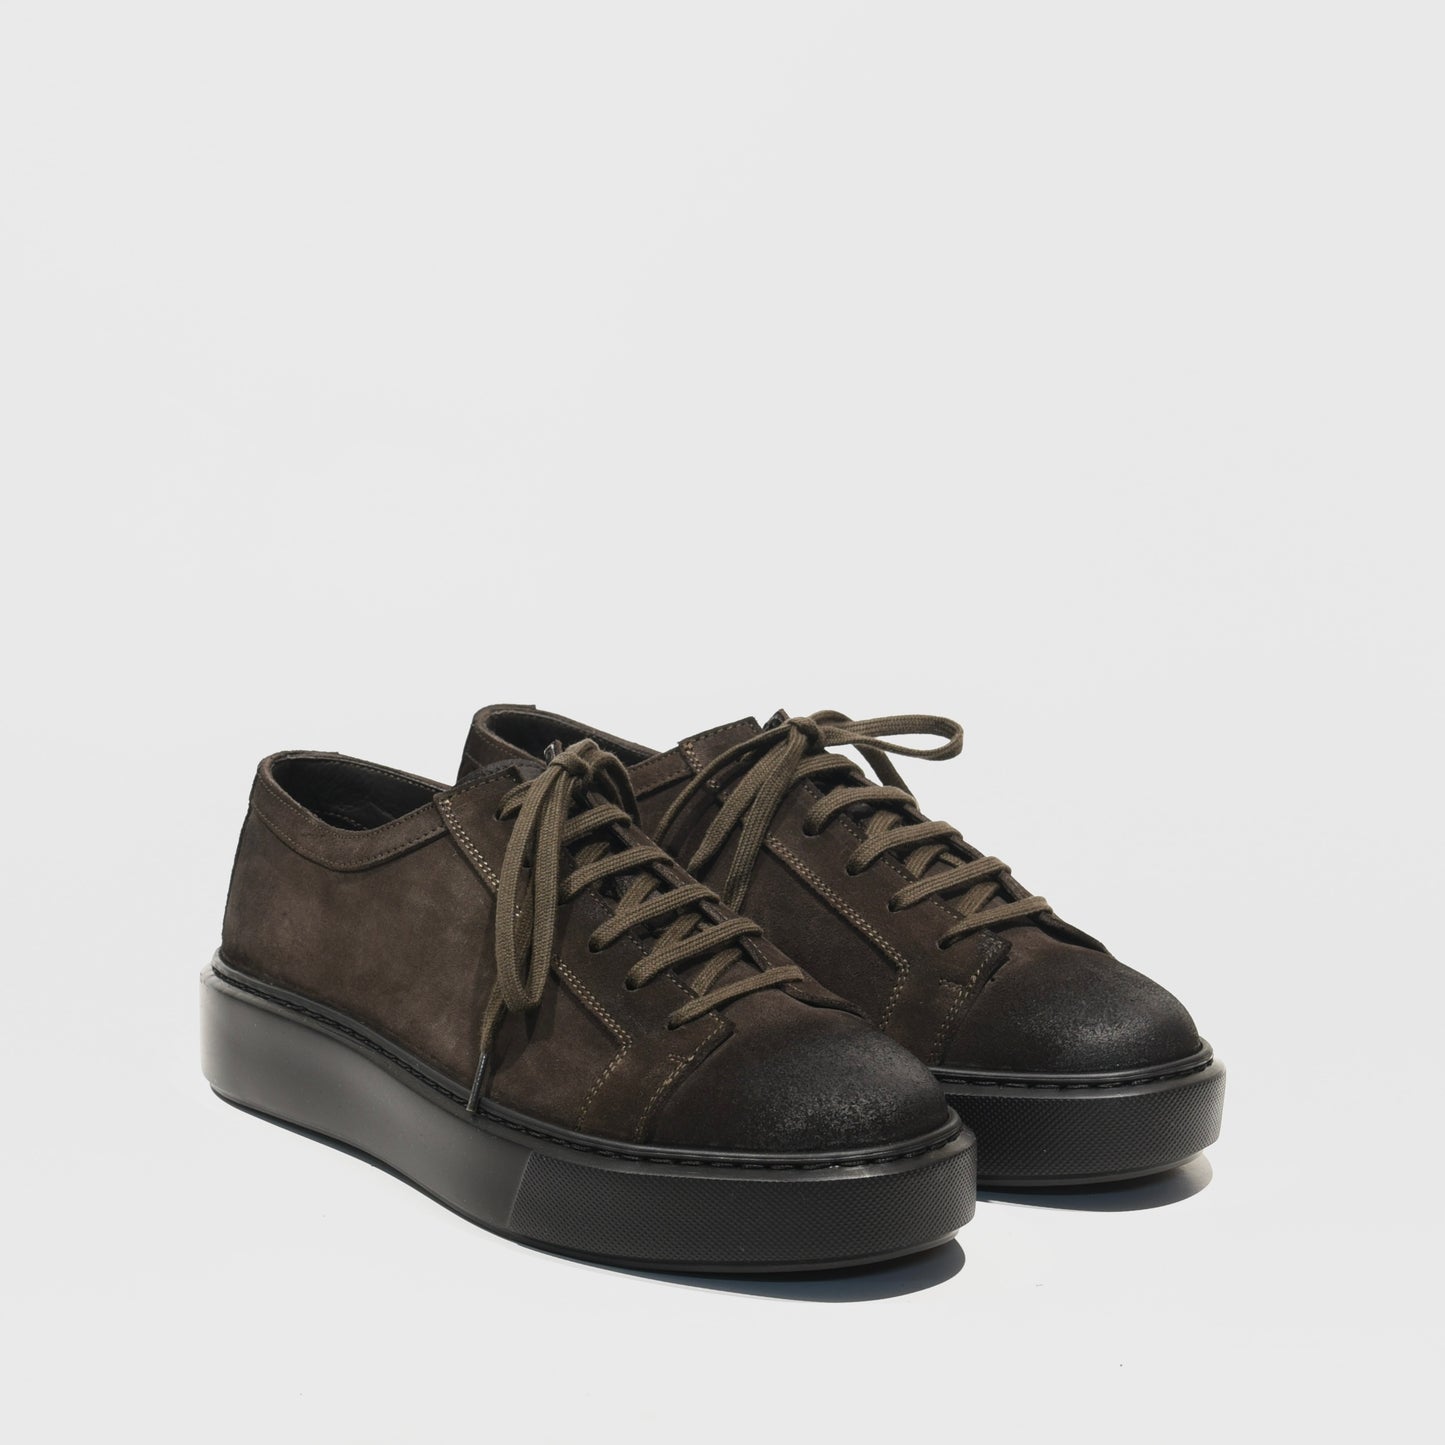 Shalapi Italian sneakers, for men in suede brown